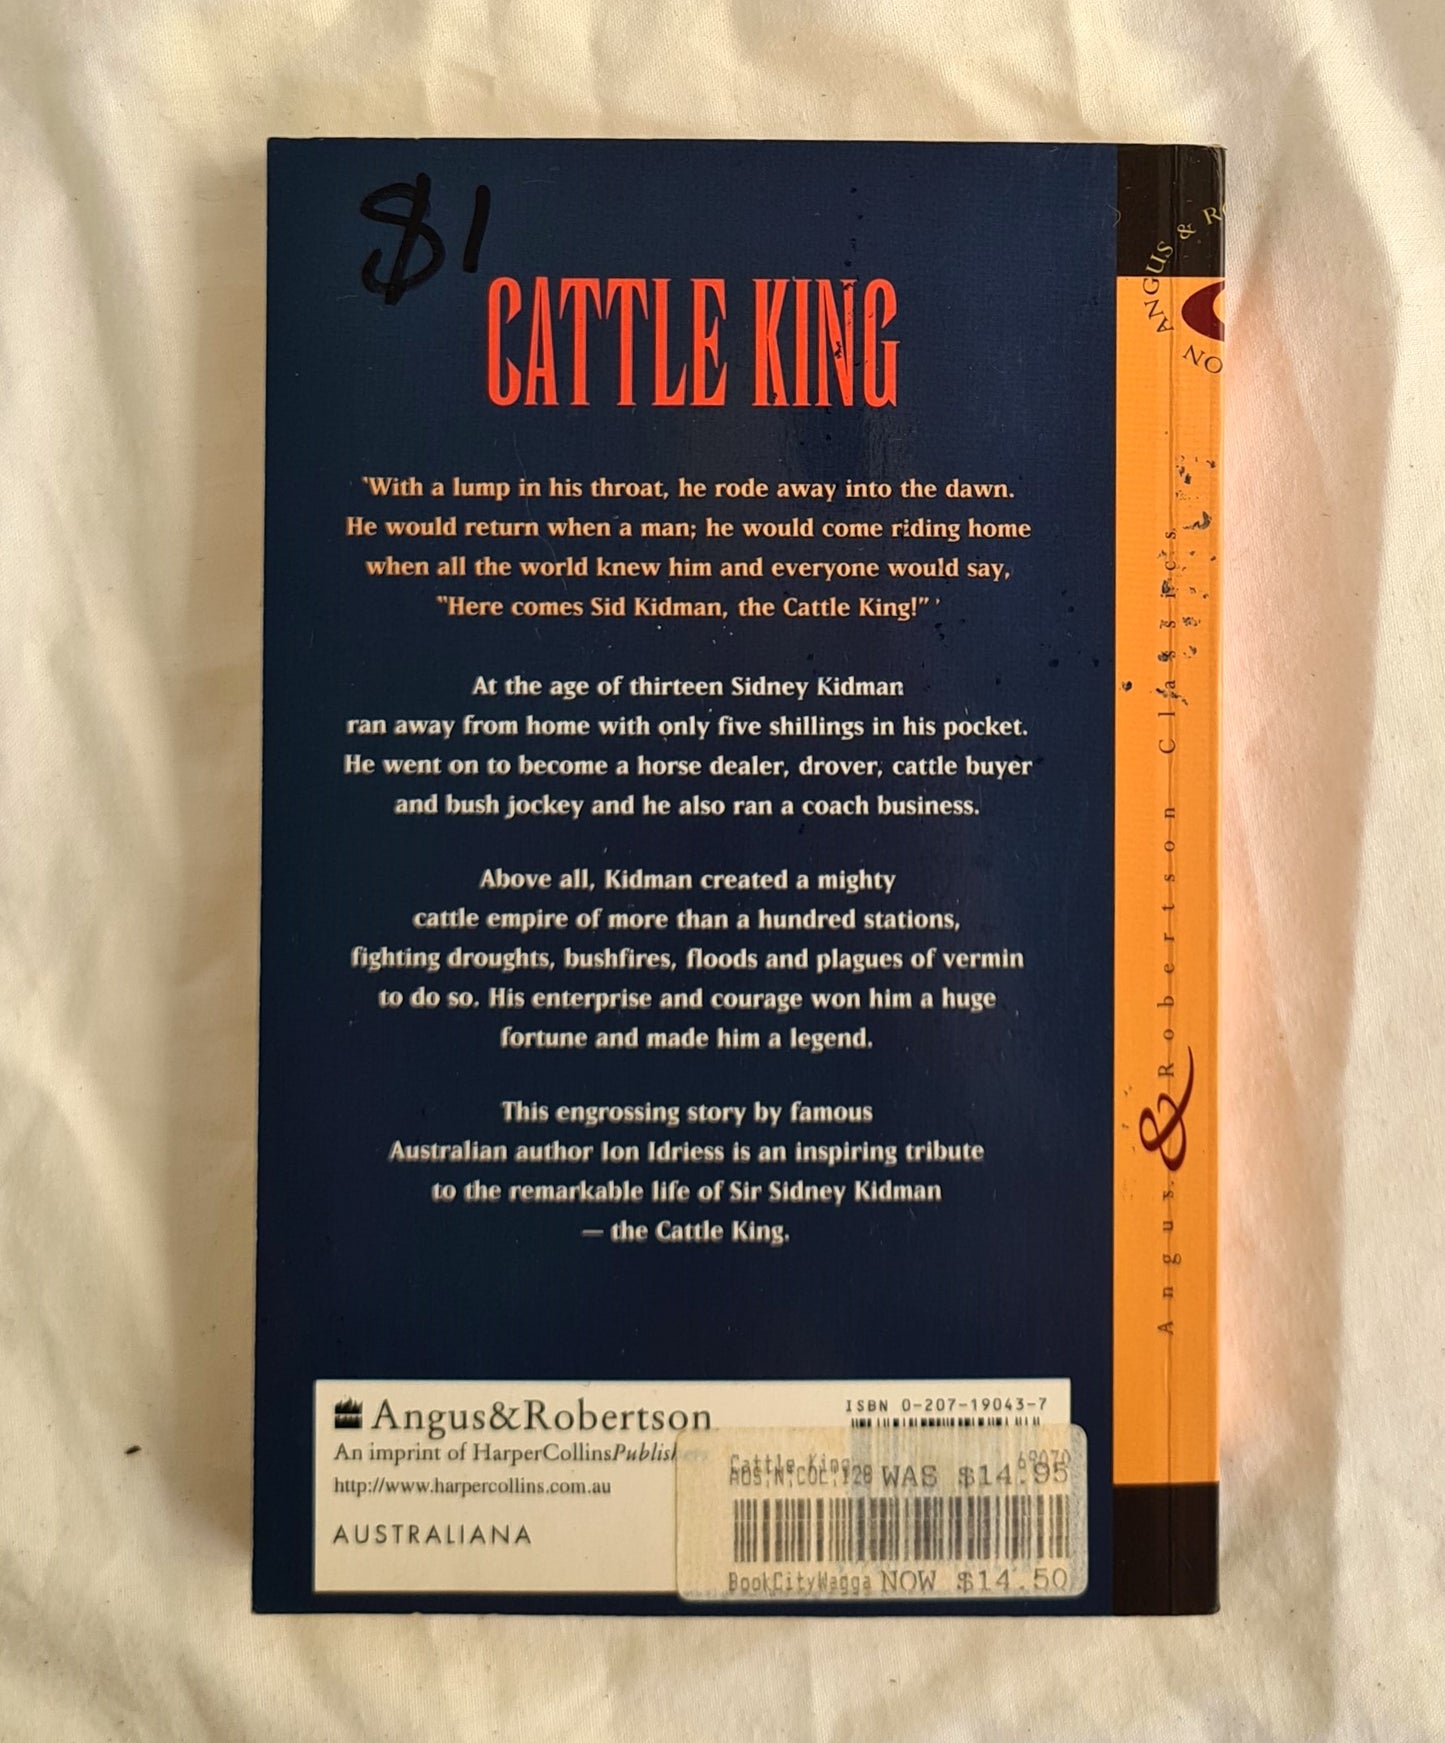 The Cattle King by Ion L. Idriess (1997)